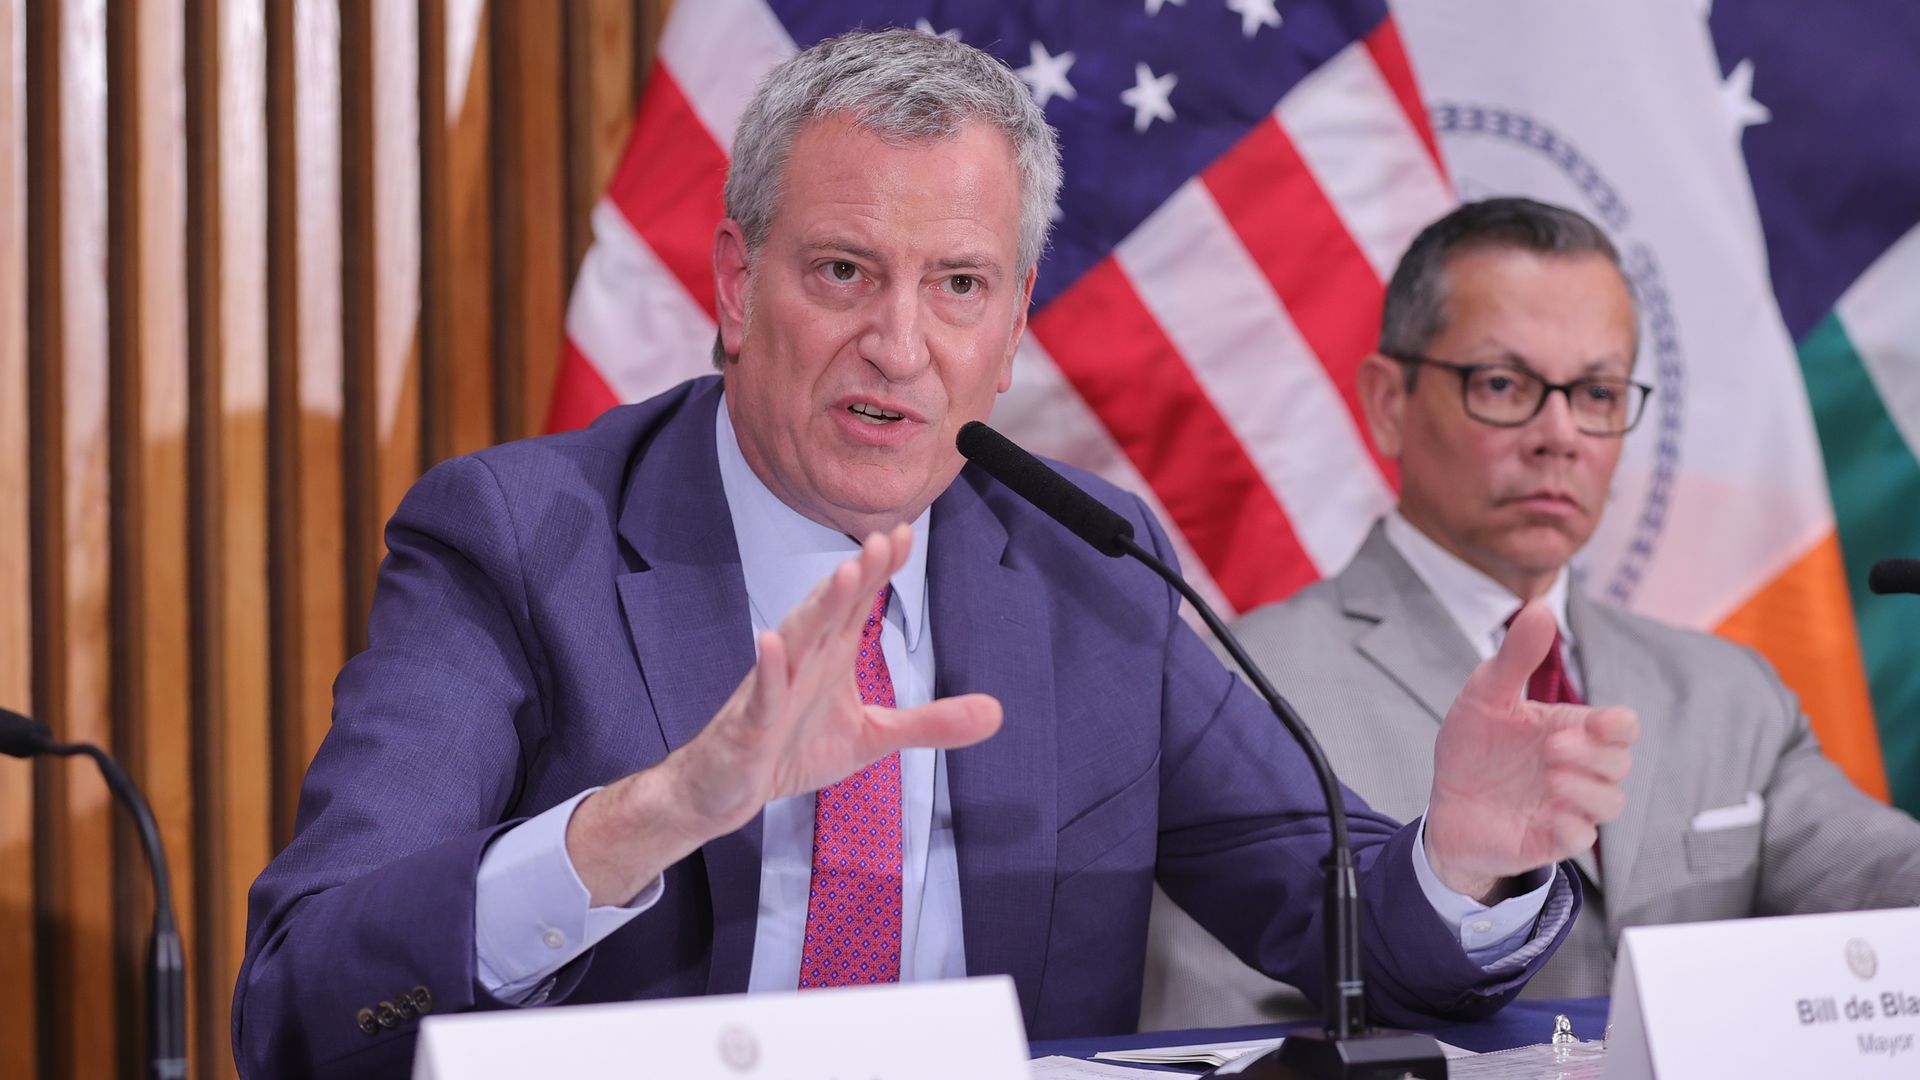  Mayor Bill de Blasio along with city officials hold a press conference 